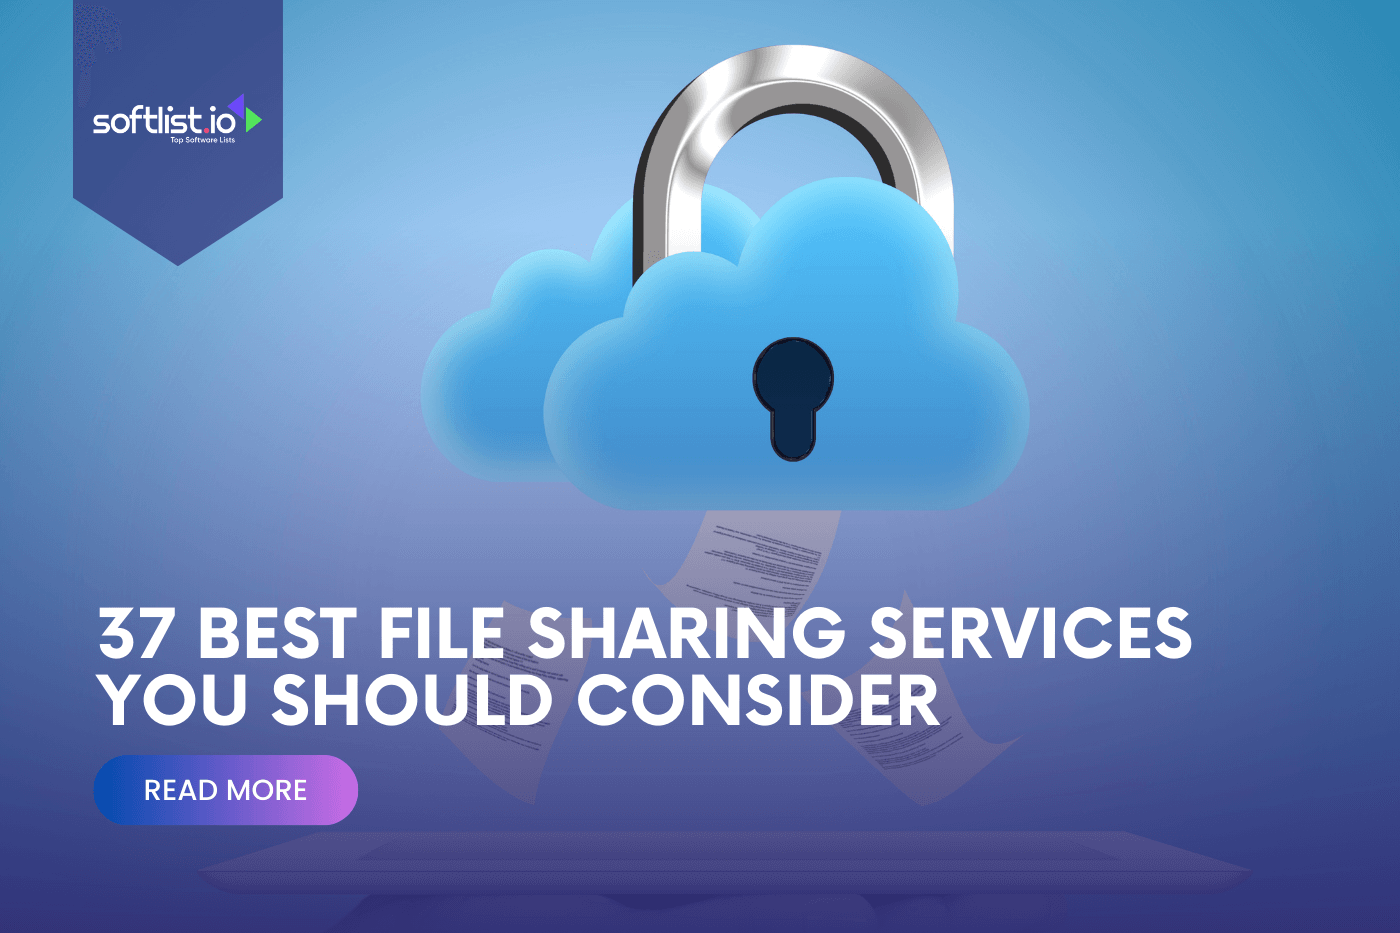 37+ Best File Sharing Services You Should Consider